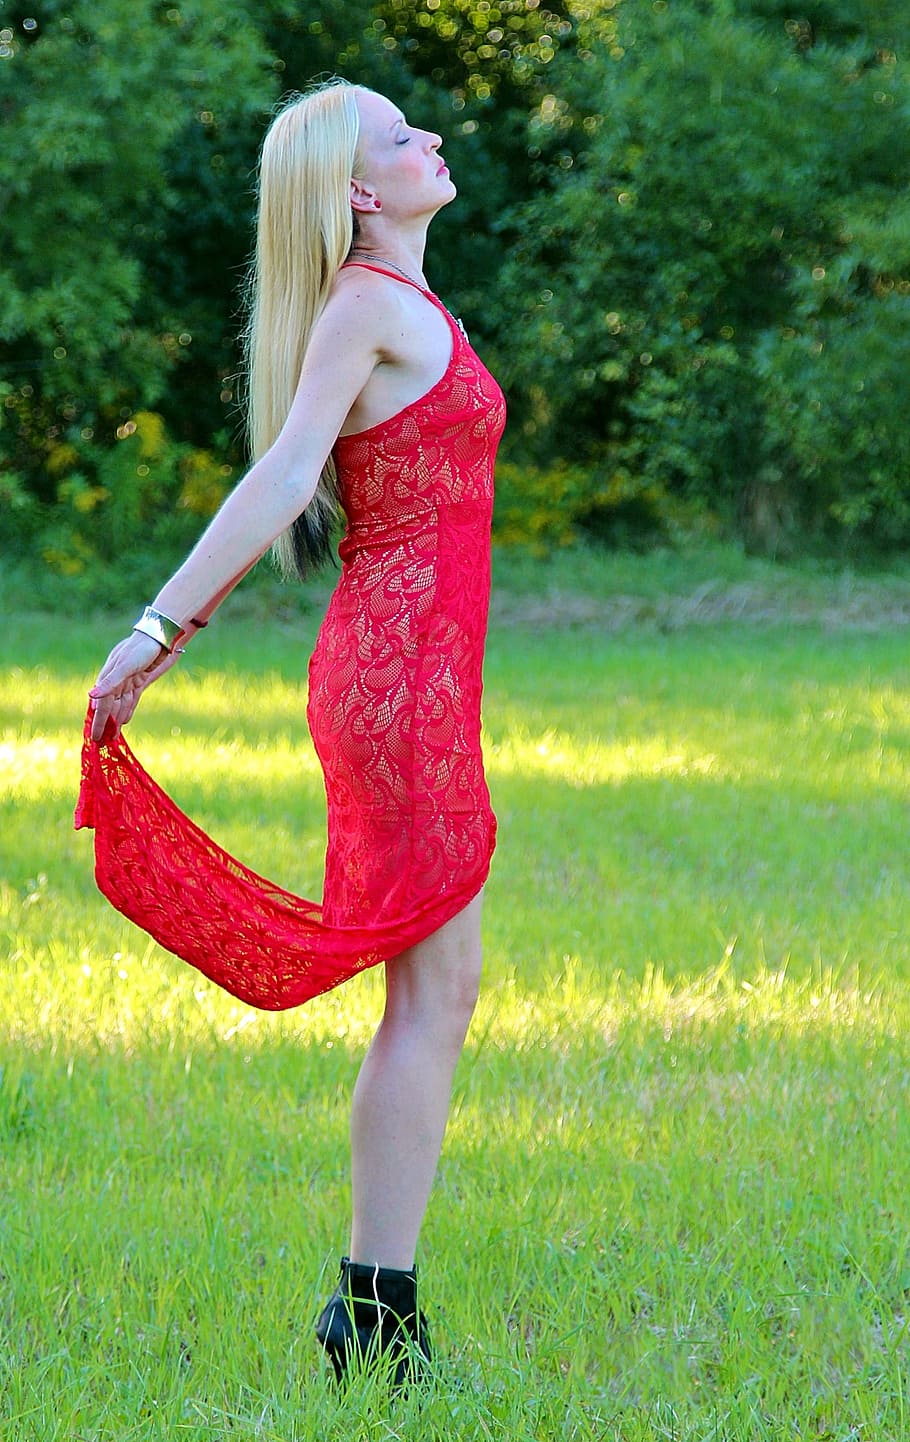 Woman Blonde Red Dress Pretty One Person One Woman Only Only Women Adults Only Grass